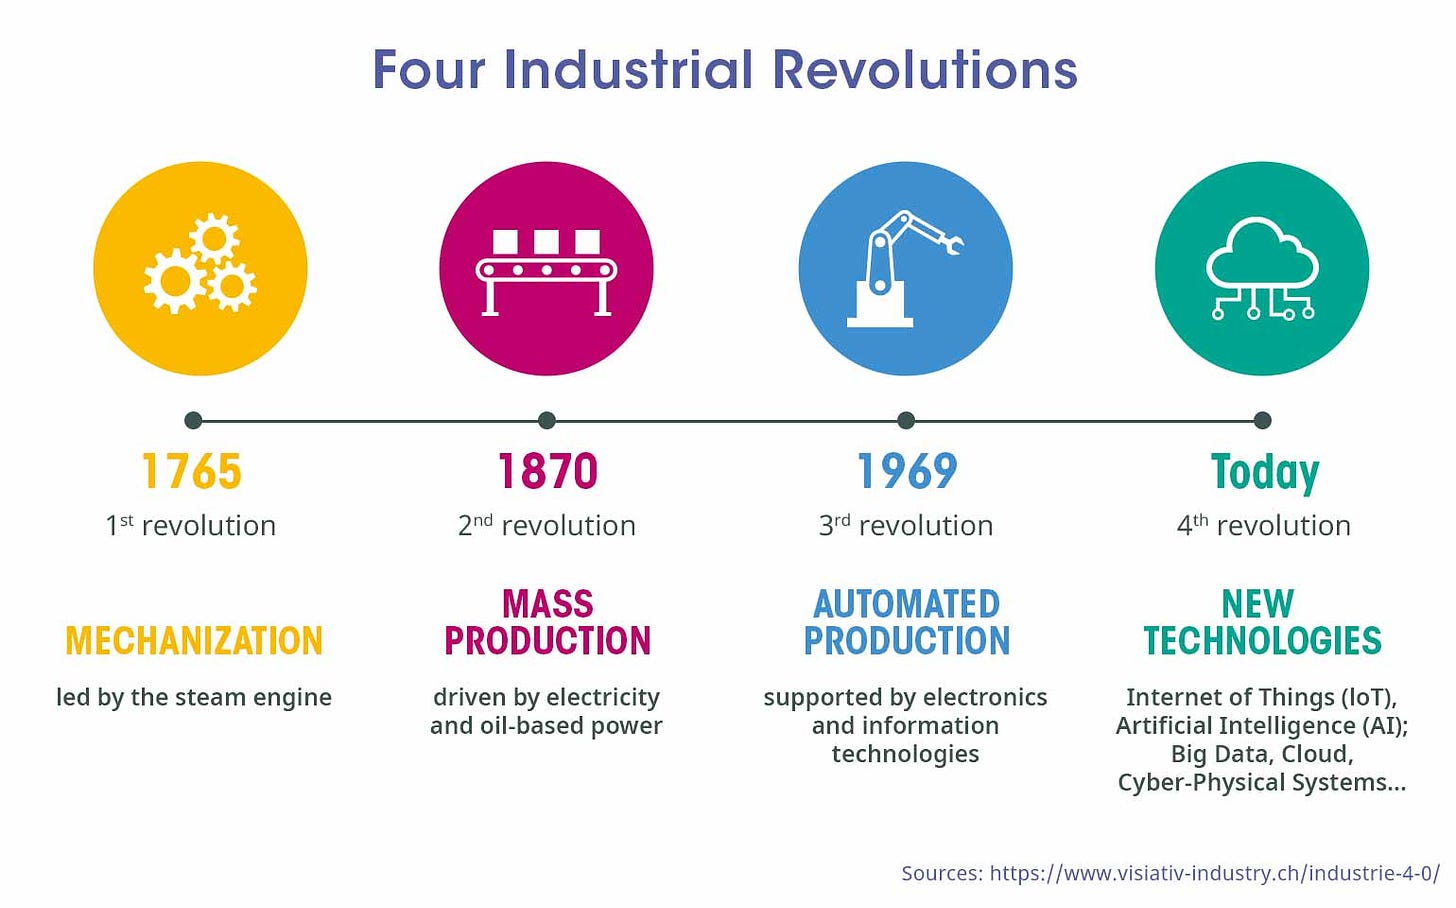 Sanofi: Smart machines driving the fourth industrial revolution |  Science|Business